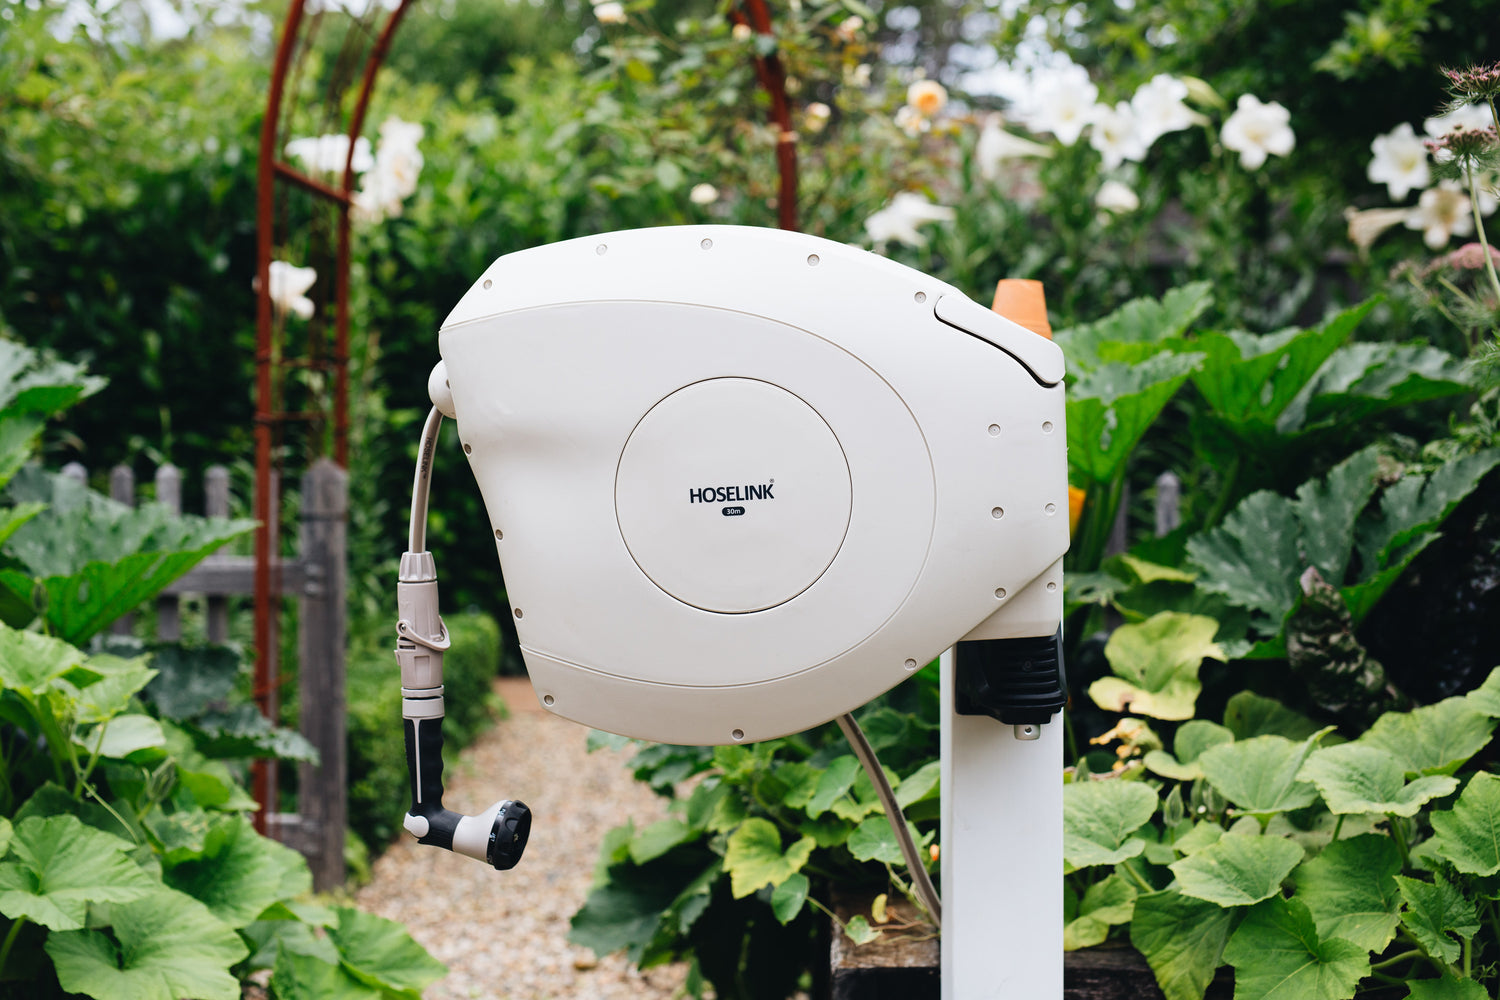 Beige Retractable Hose Reel on Mounting Post Surrounded by Plants